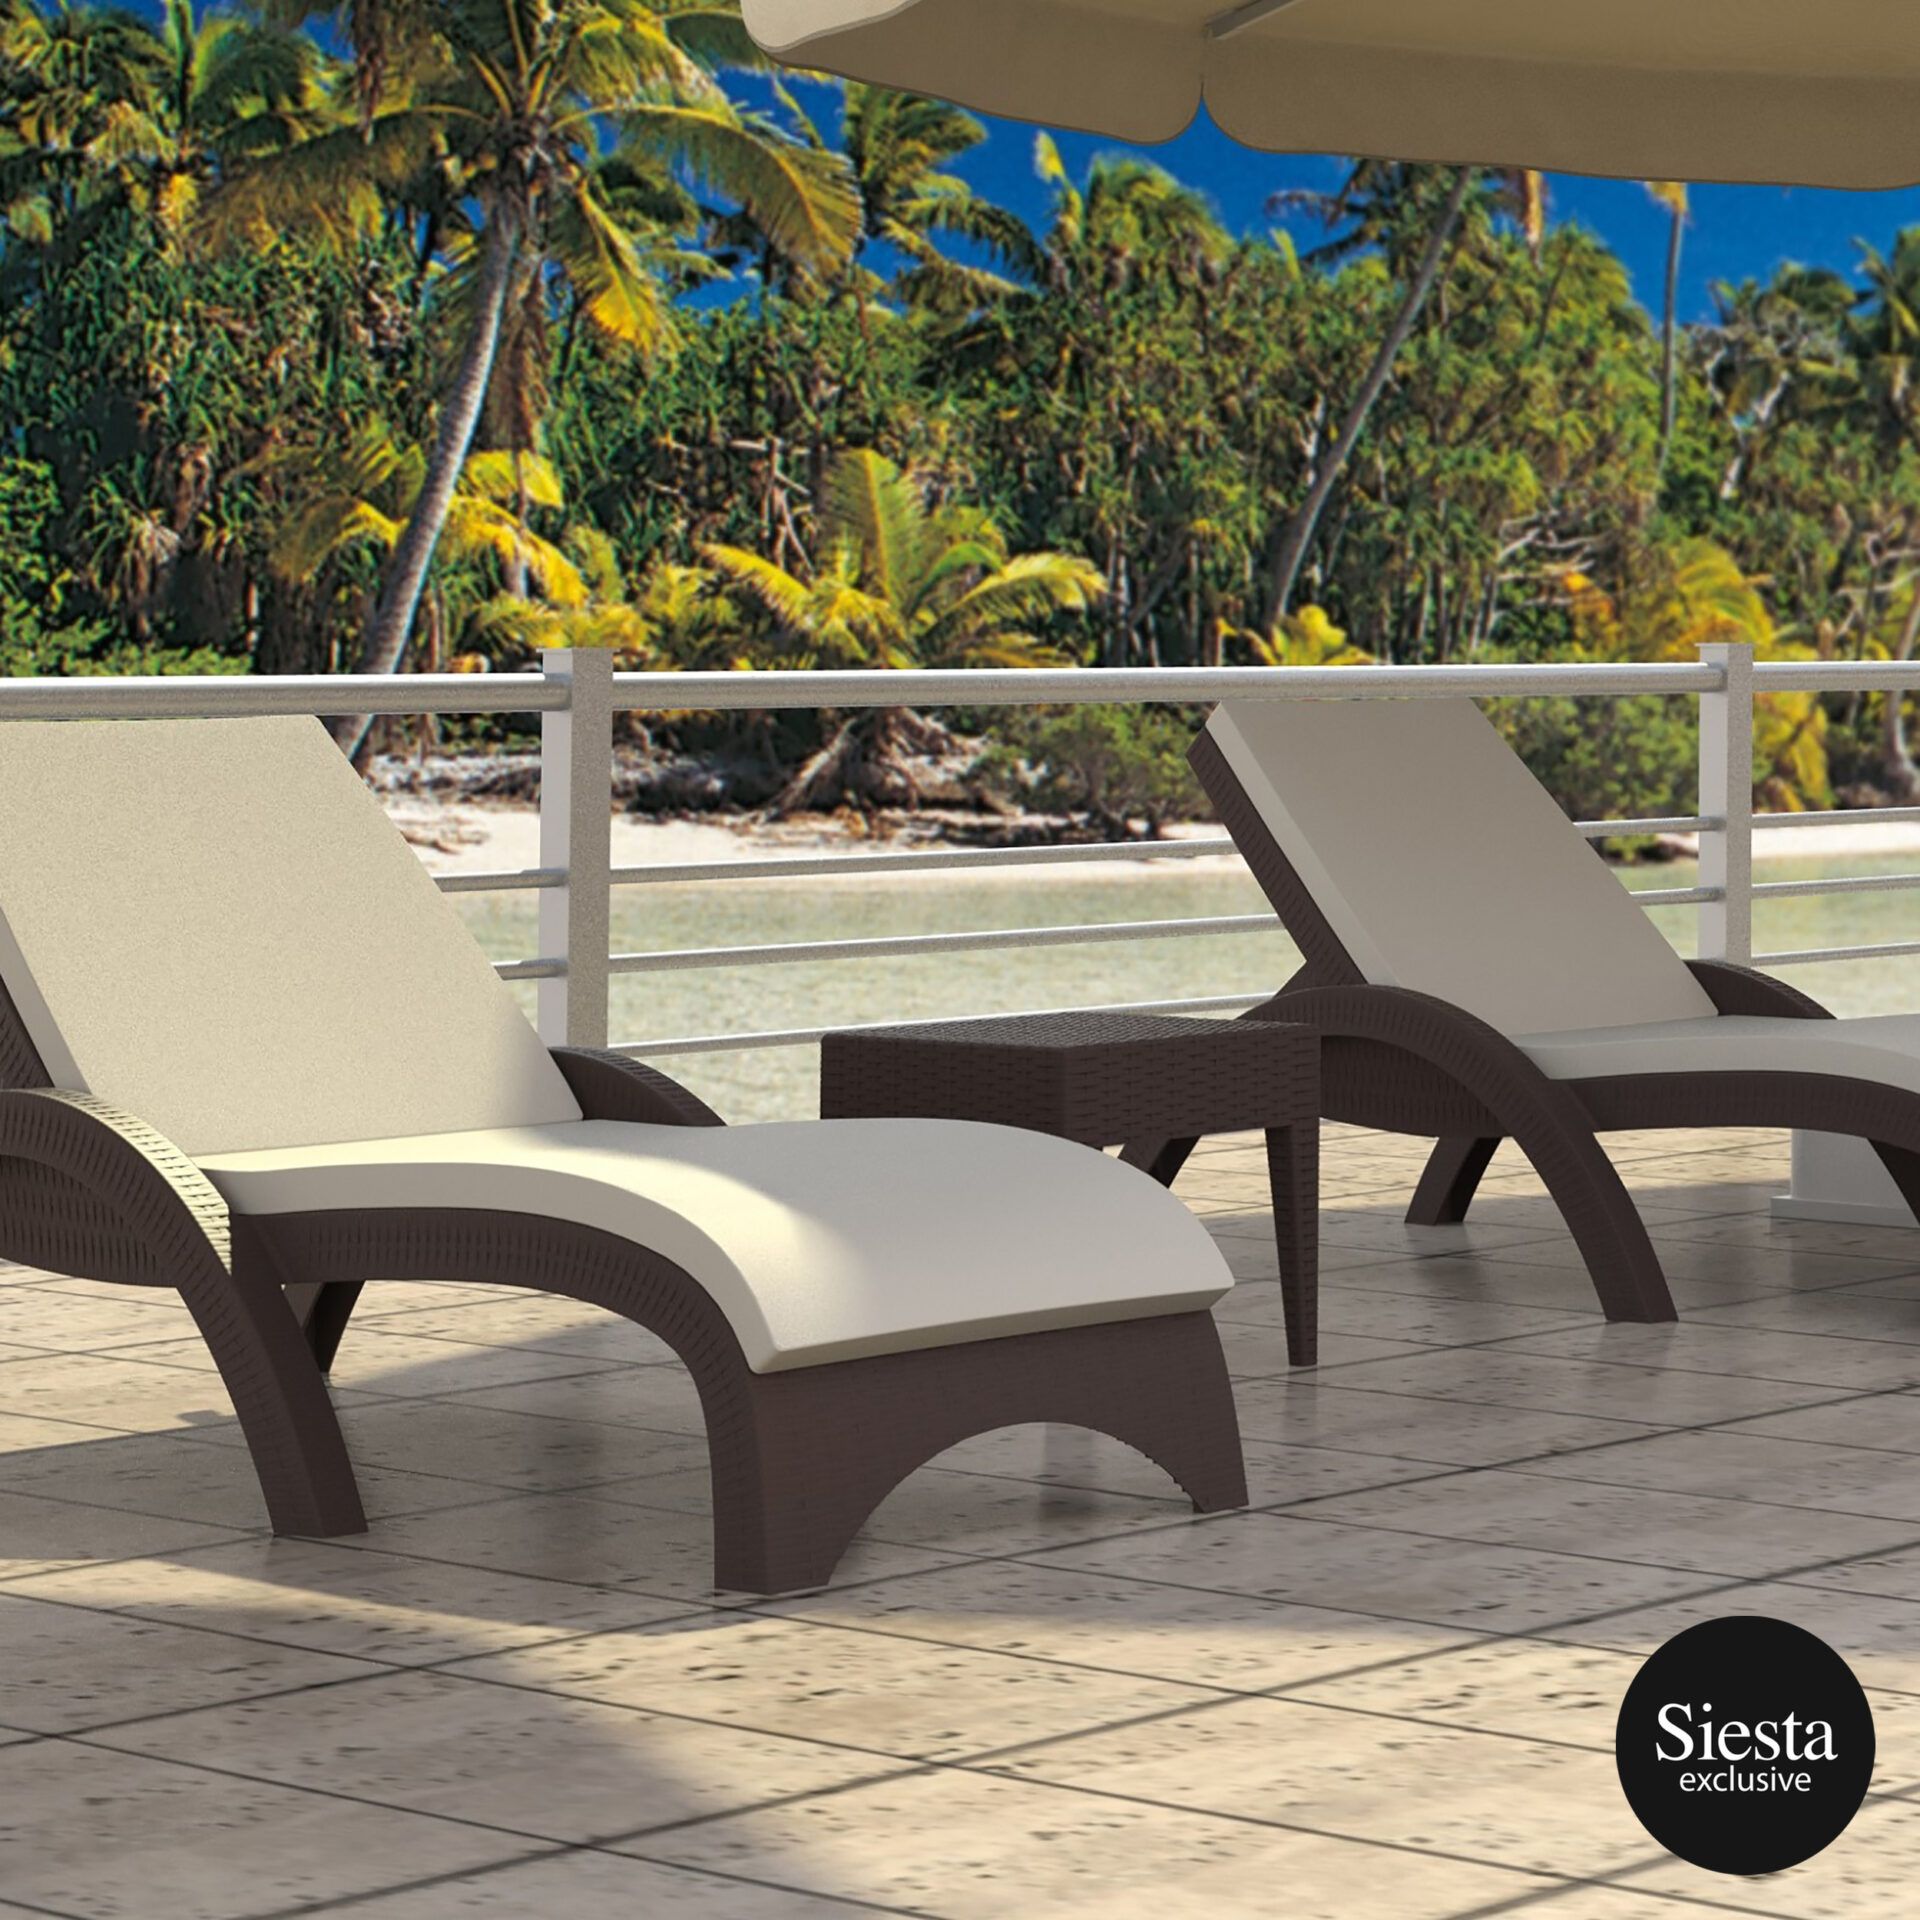 Fiji Sunlounger/Tequila Side Table 3 Pc Package - Chocolate With Beige Cushion